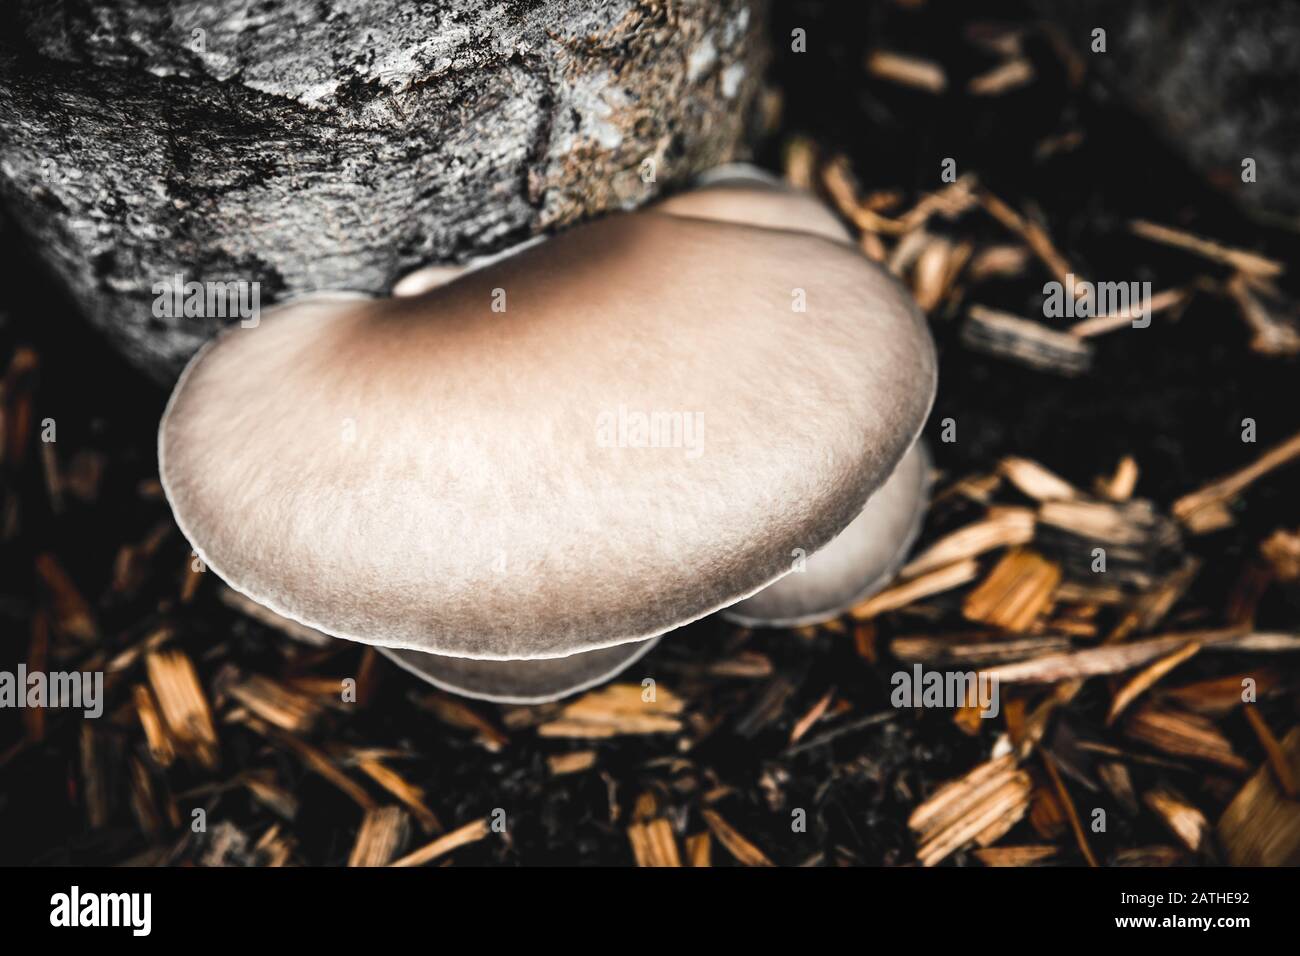 Topview of growing up oyster mushrooms on a beech stump, fungi cultivation Stock Photo